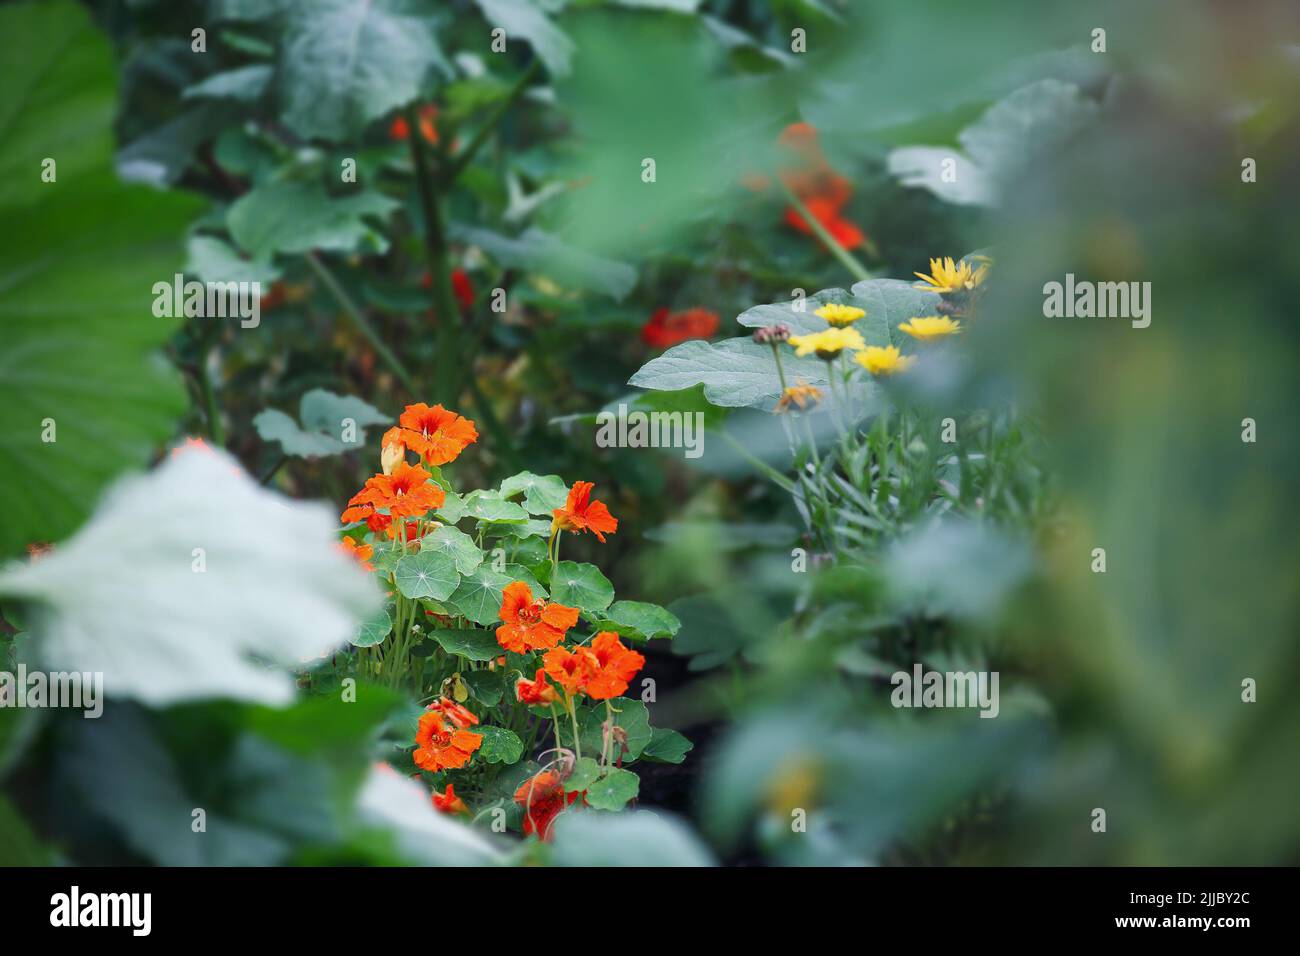 Nasturtiums, companion plants, growing as a trap crop for attracting aphids or squash bugs from vegetable plants. Extreme selective focus with blurred Stock Photo